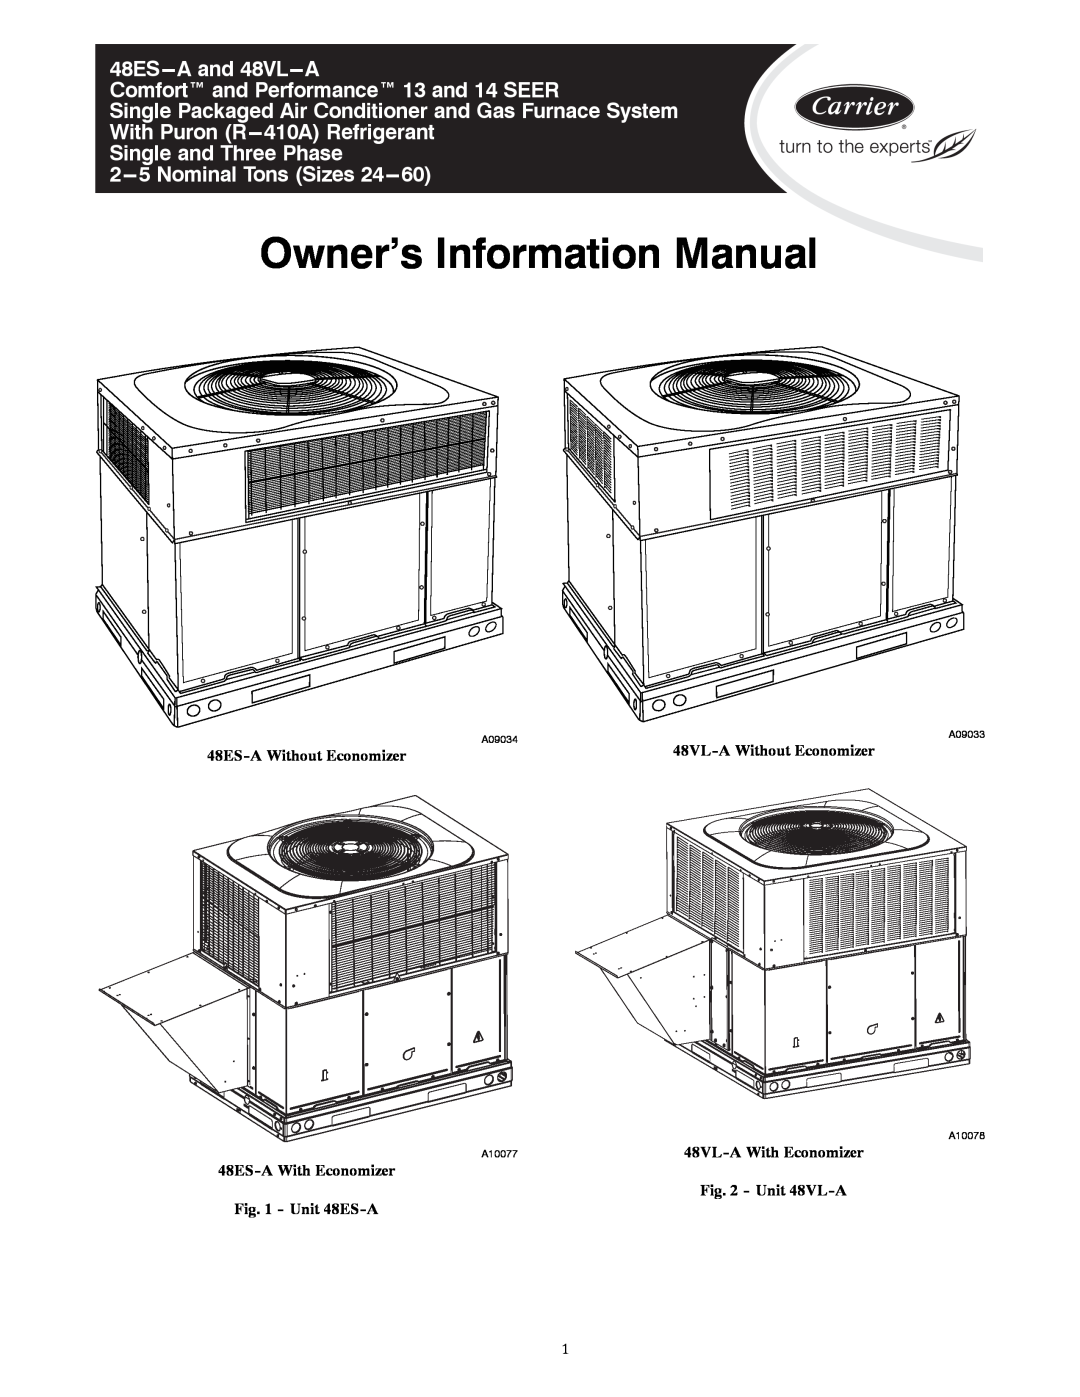 Carrier 48VL-A manual Owner’s Information Manual, 48ES---Aand 48VL---A, Comfort and Performance 13 and 14 SEER, A09034 